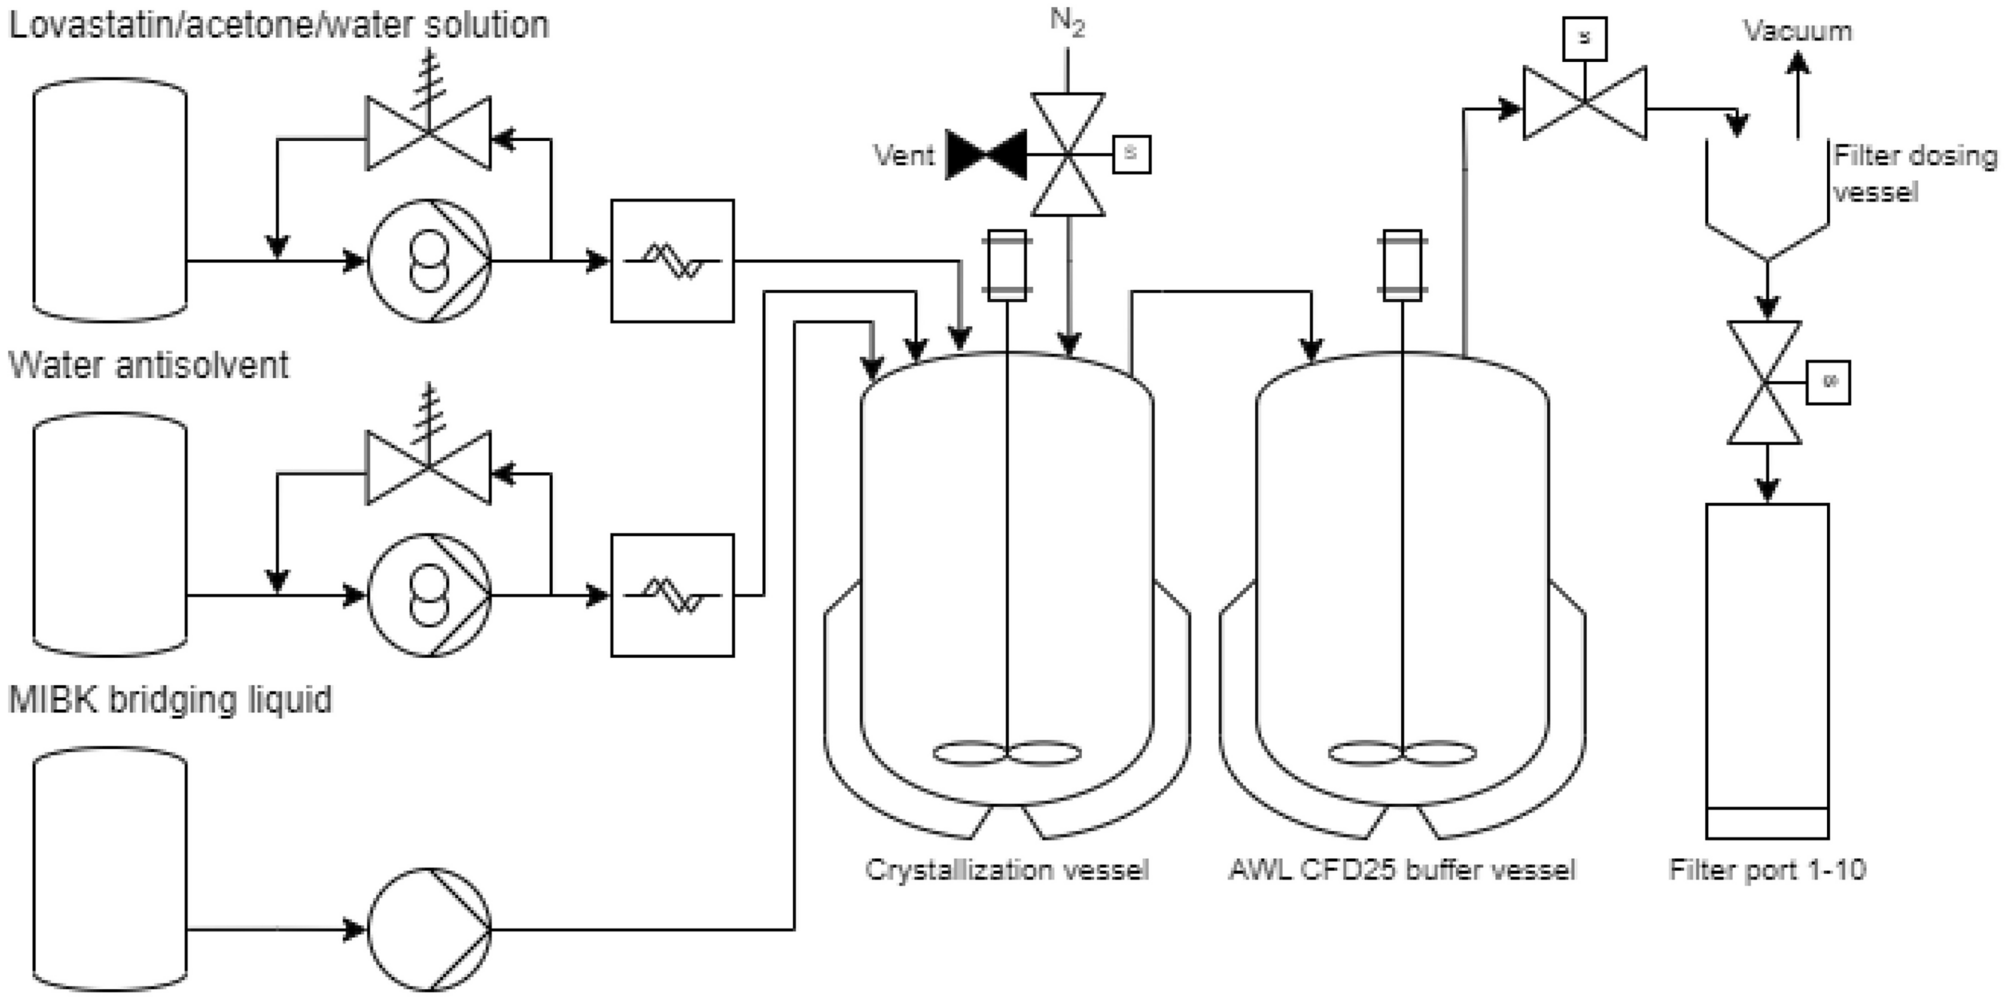 Integrated Continuous Process Design for Crystallisation, Spherical Agglomeration, and Filtration of Lovastatin